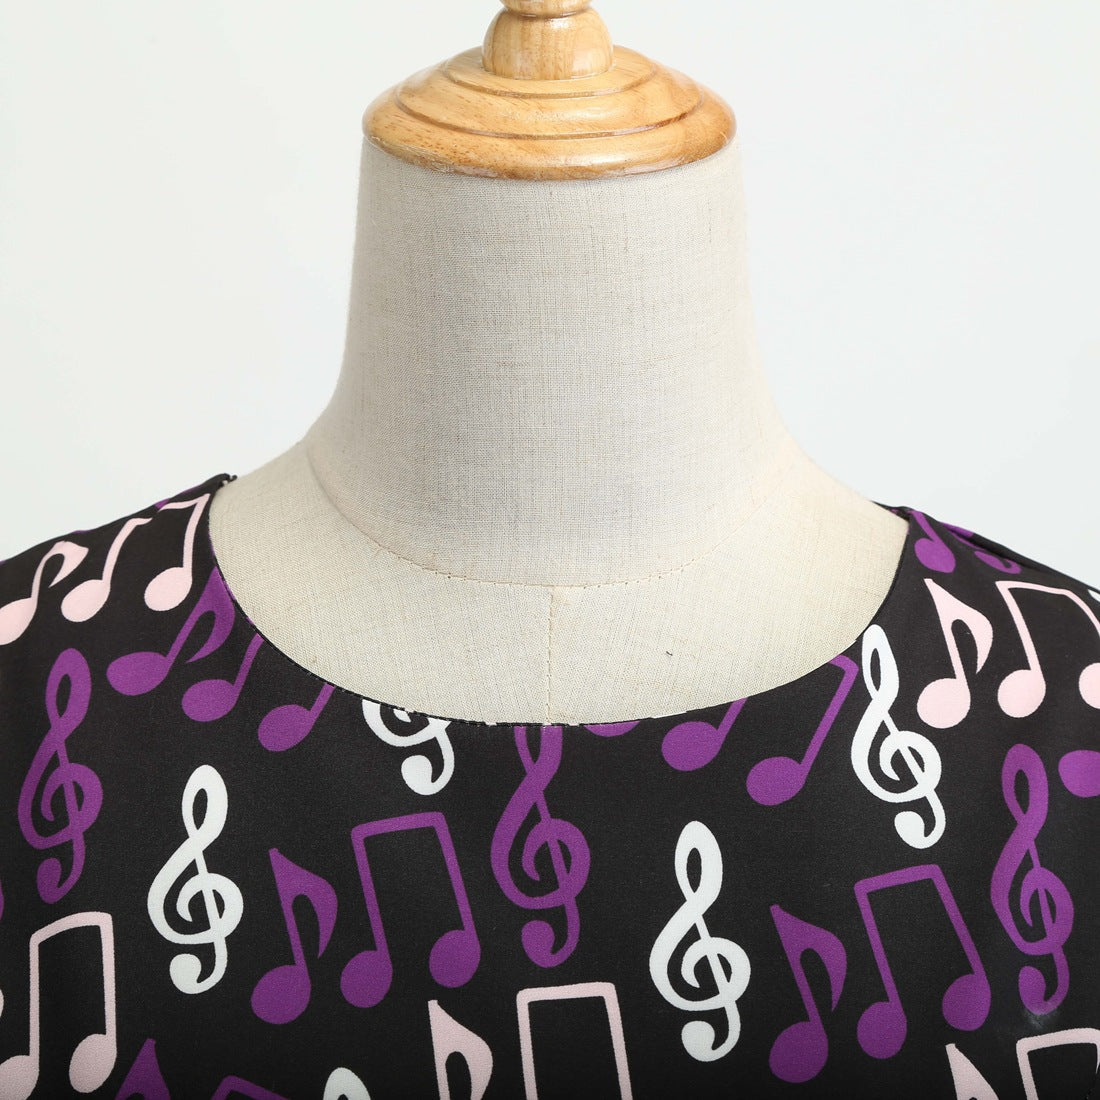 Vintage Music Note Dresses for Women-Dresses-White-S-Free Shipping Leatheretro